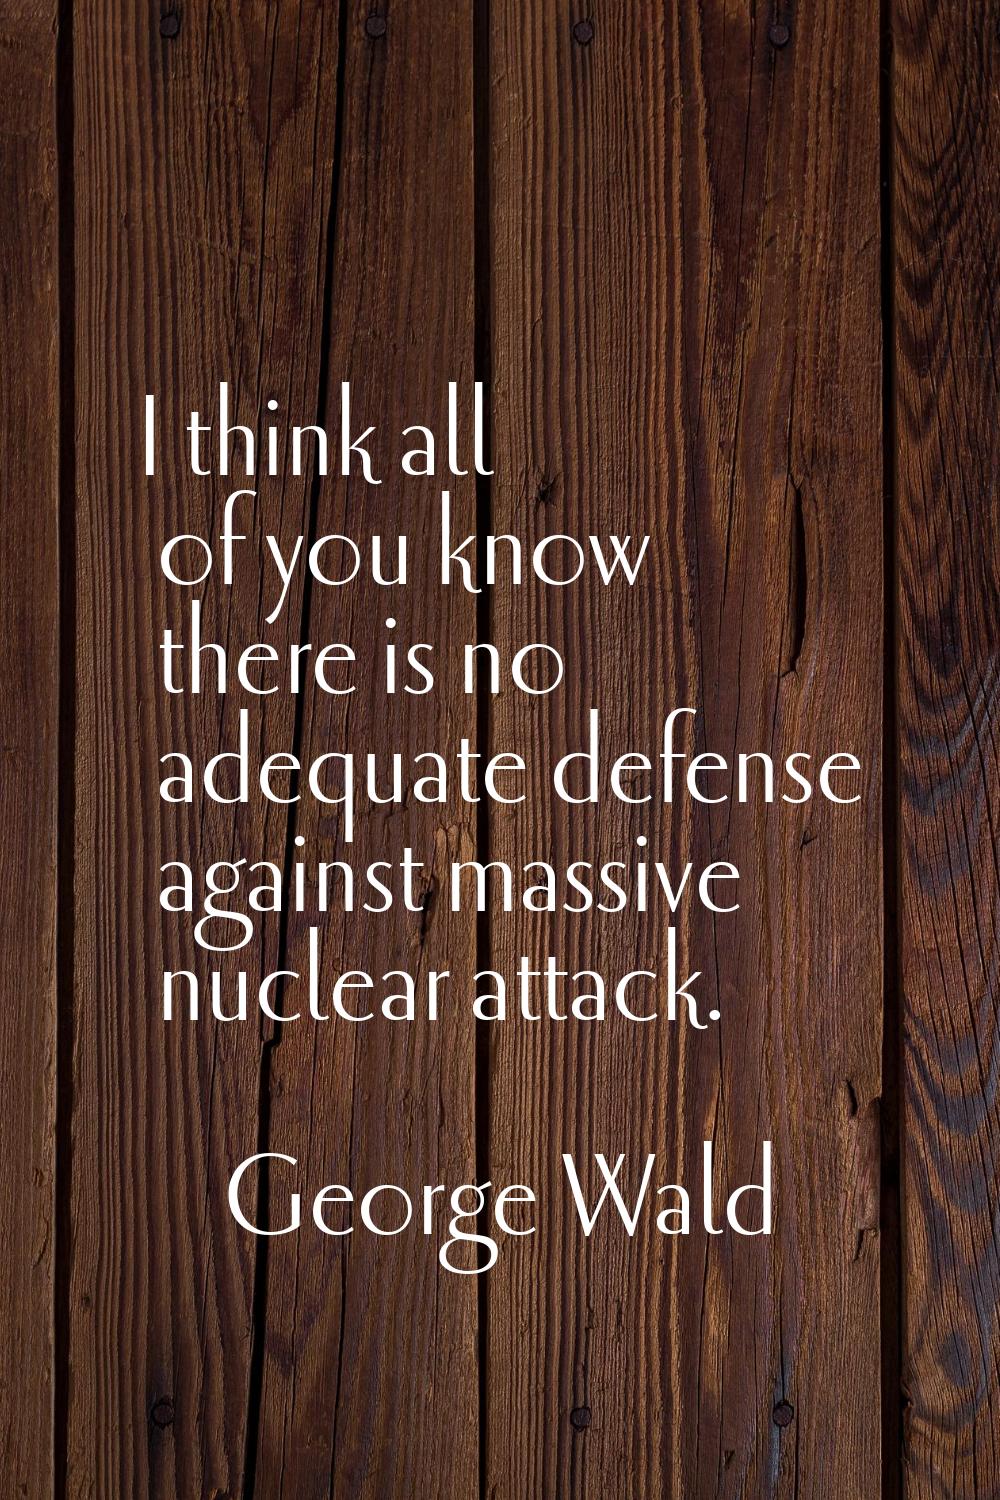 I think all of you know there is no adequate defense against massive nuclear attack.